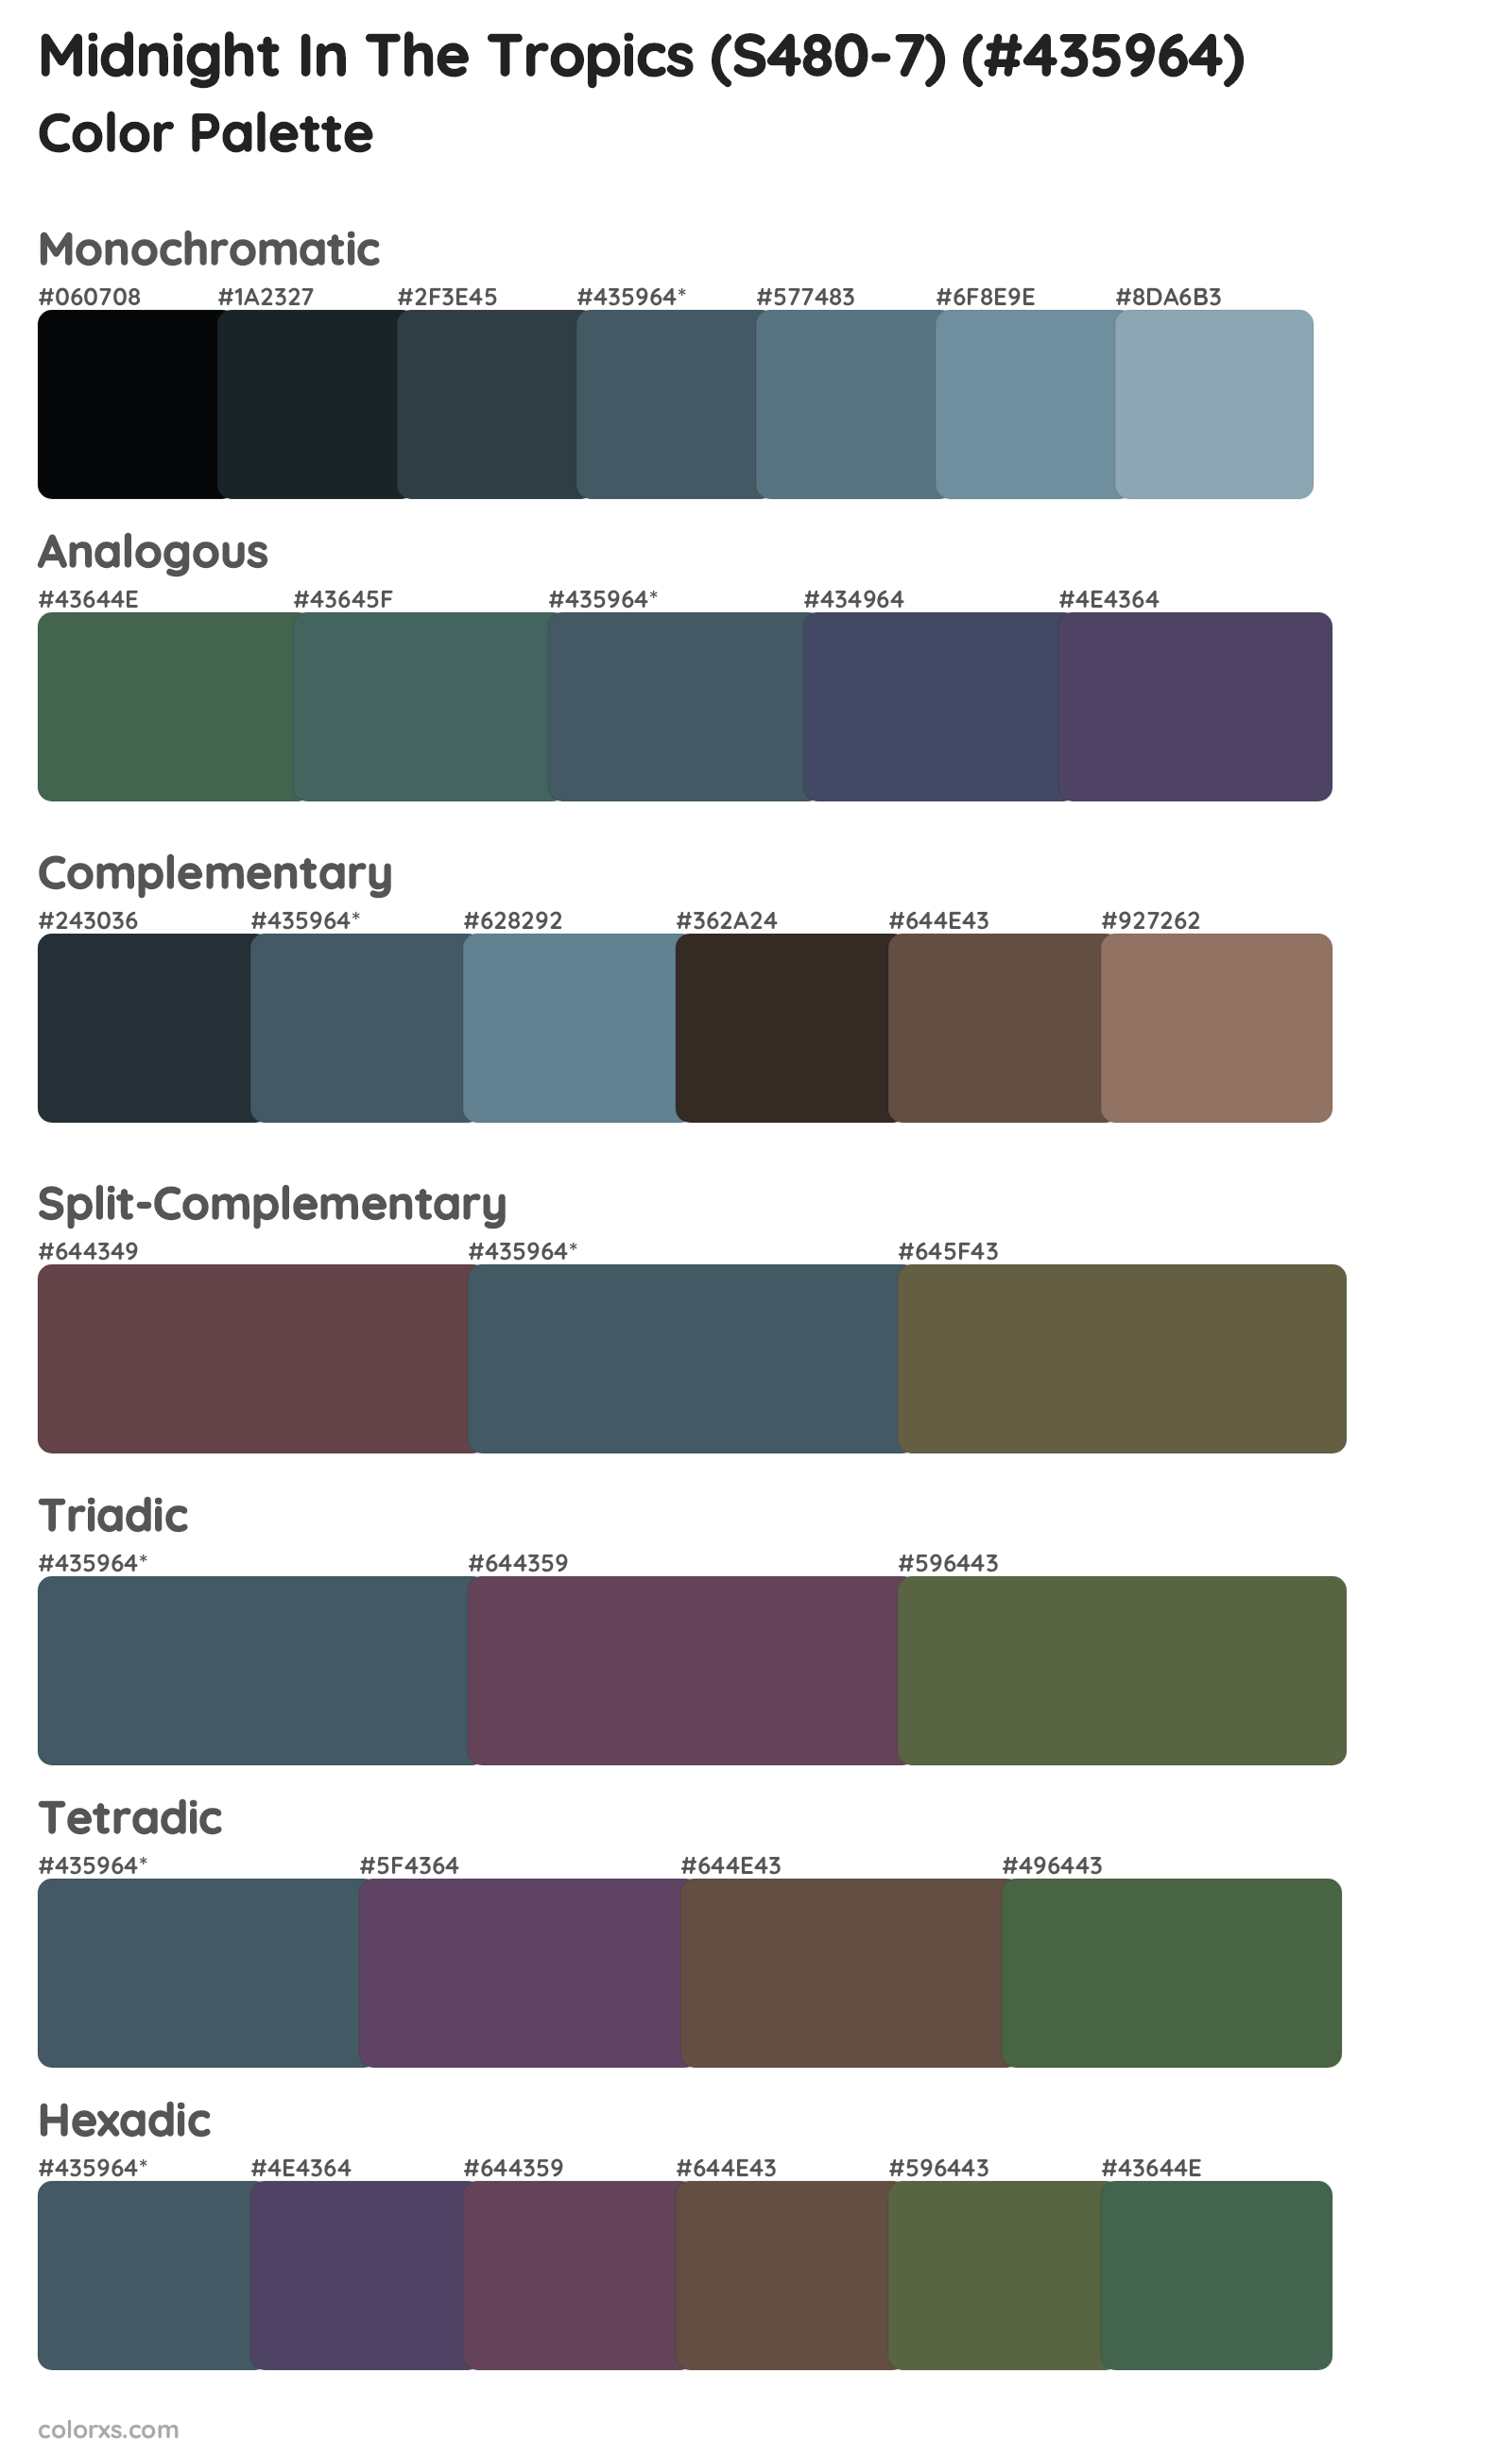 Midnight In The Tropics (S480-7) Color Scheme Palettes